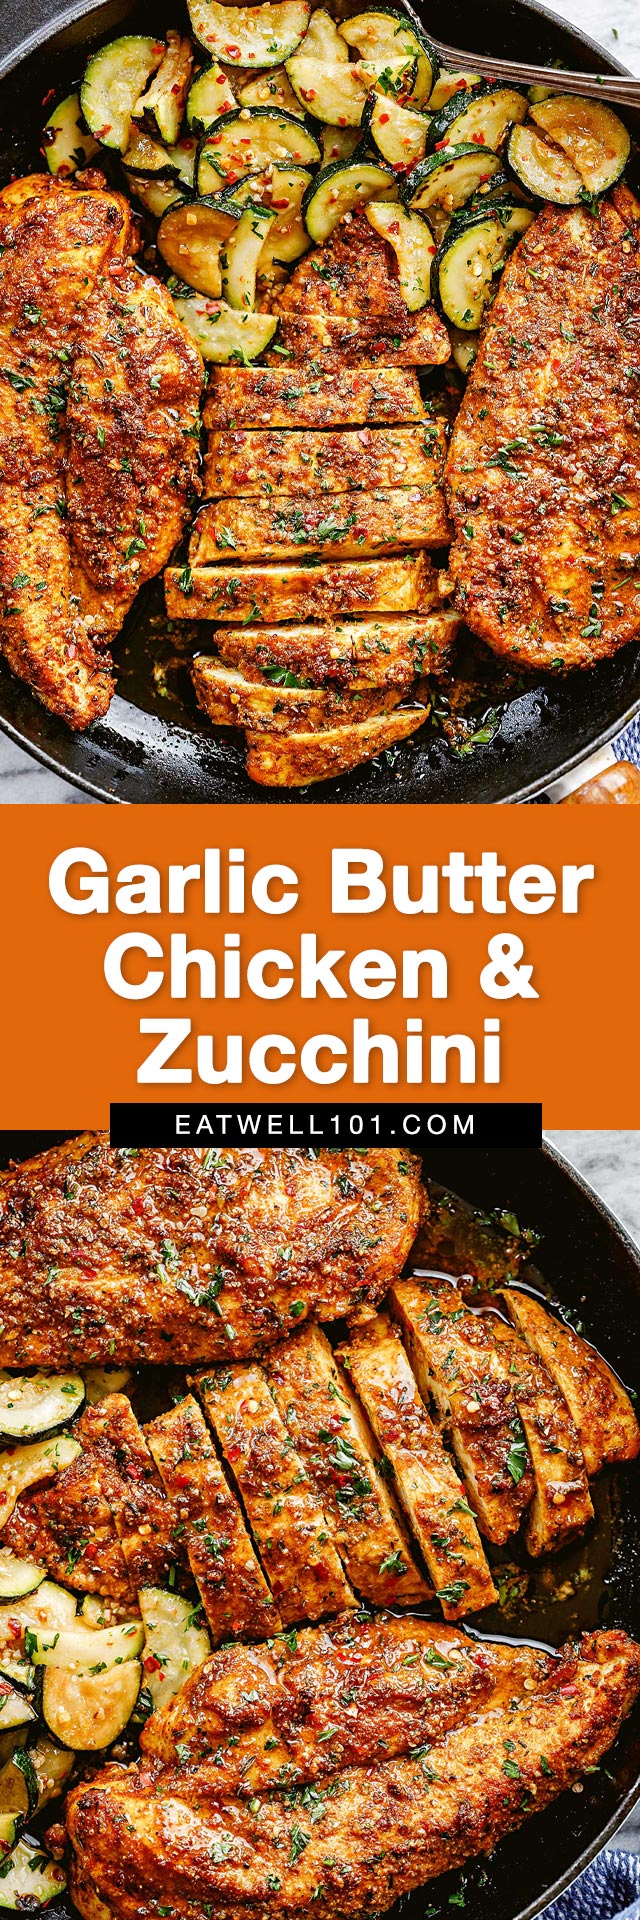 This garlic butter chicken - #chicken #recipe #eatwell101 - 
 Perfect for a quick and easy weeknight dinner. Garlic butter chicken is delicious with its side of zucchini cooked straight in the same pan for easy cleanup. You'll 
 ❤️ the flavors!